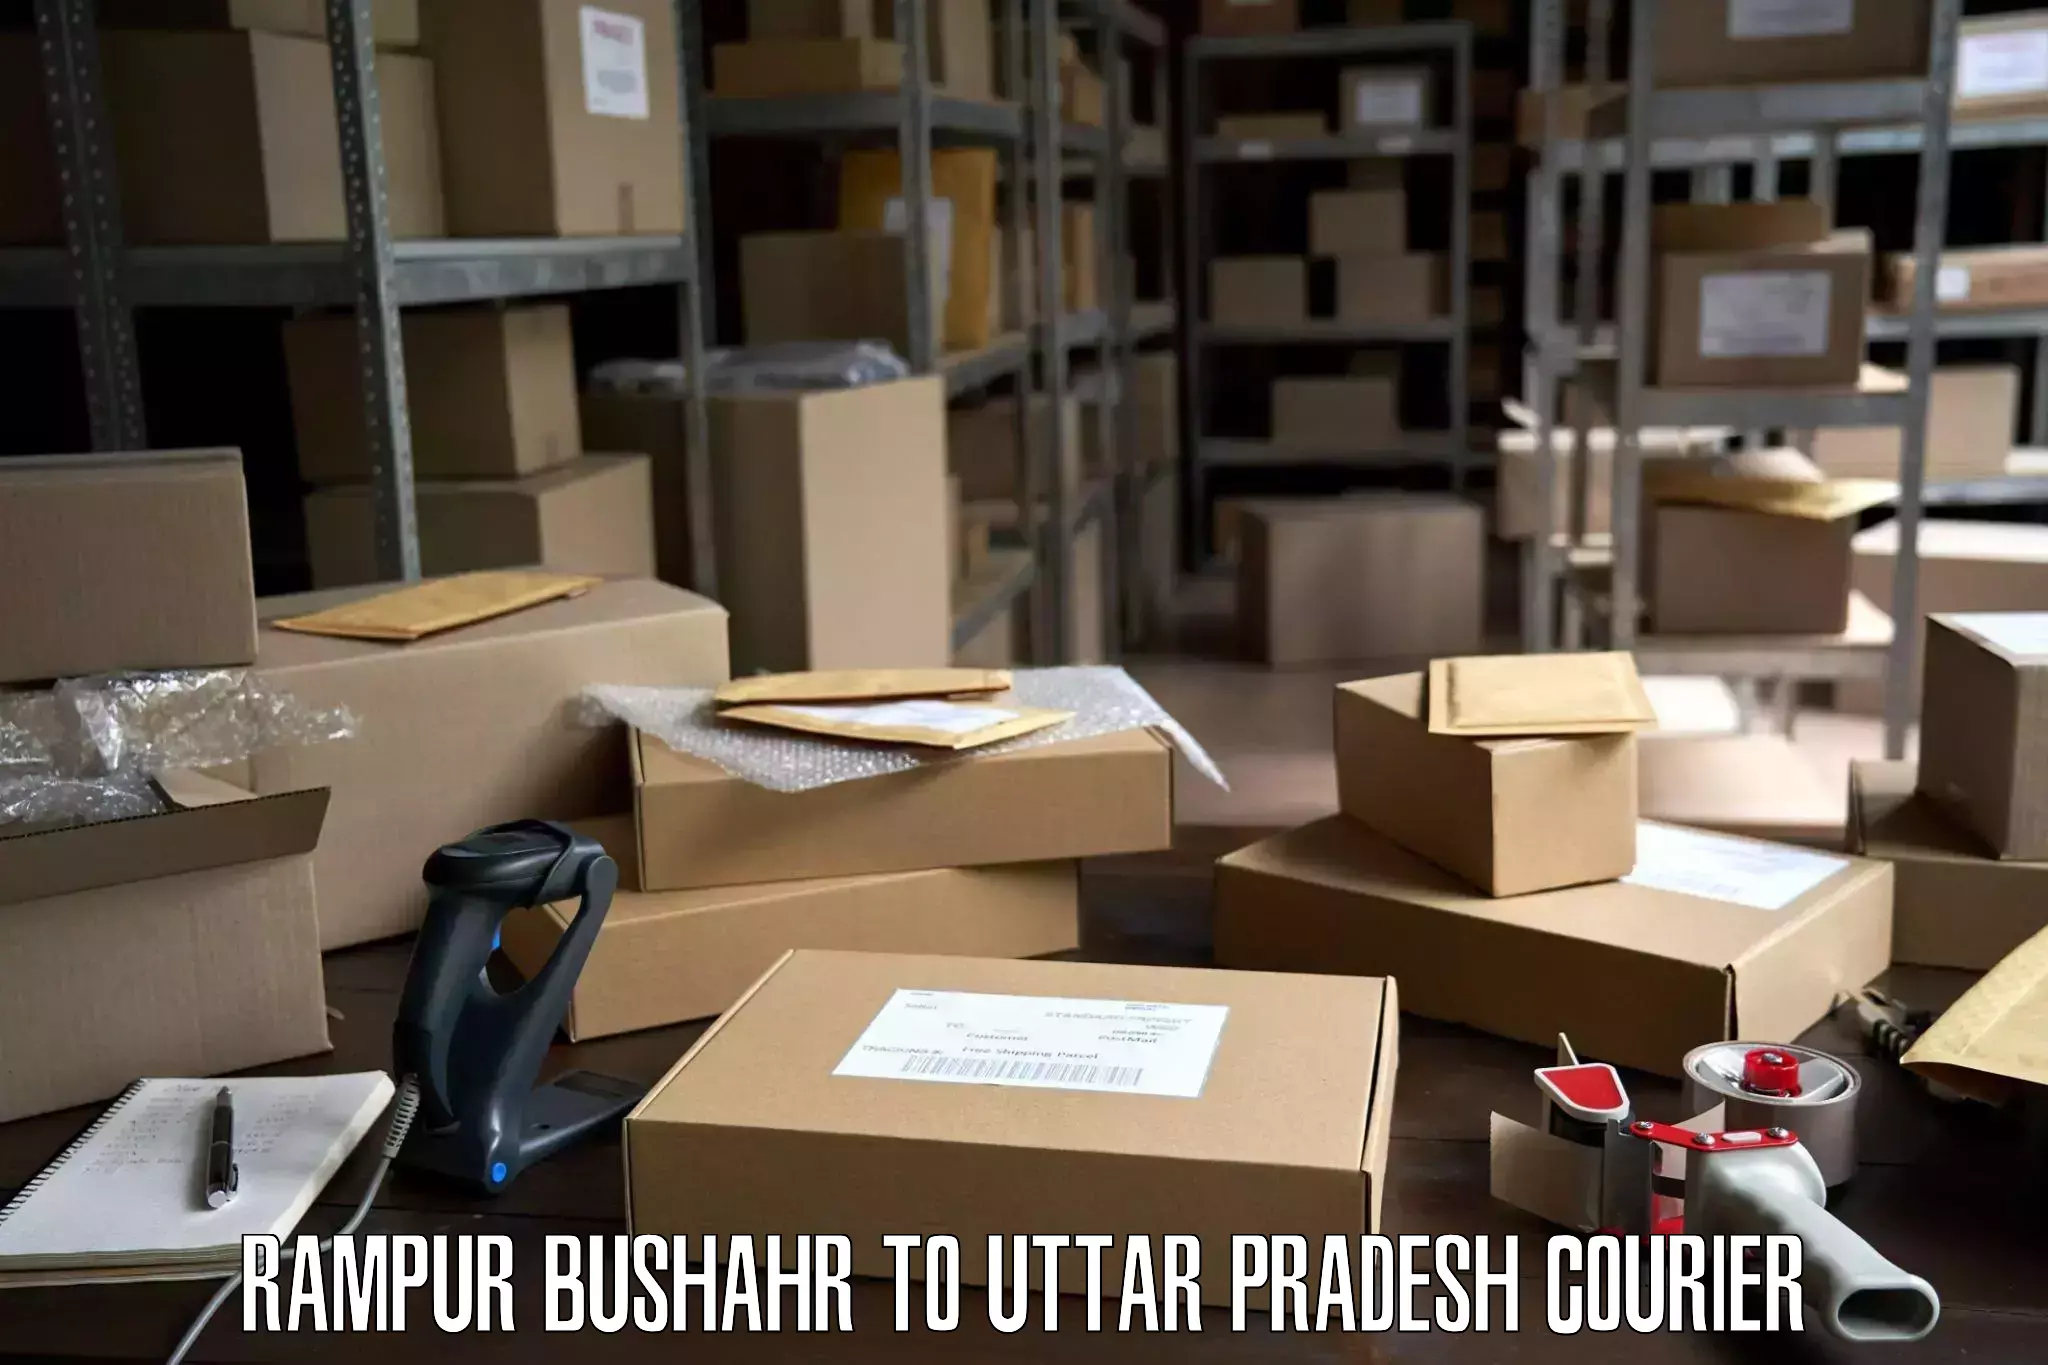 Trusted relocation experts Rampur Bushahr to Ayodhya